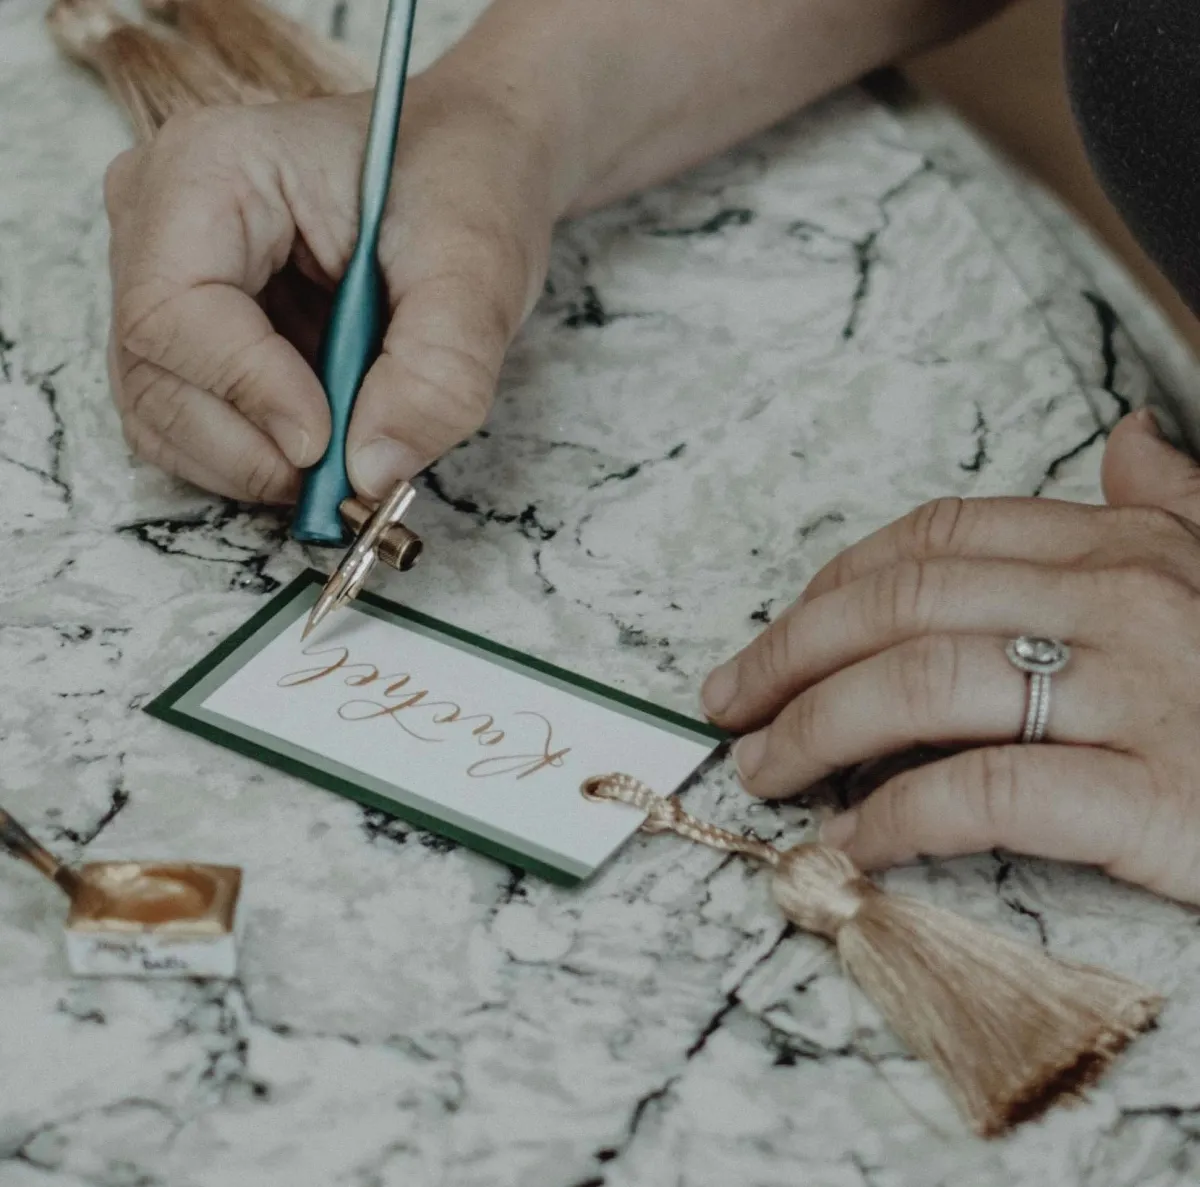 The Oxford Calligrapher writing a calligraphy place card